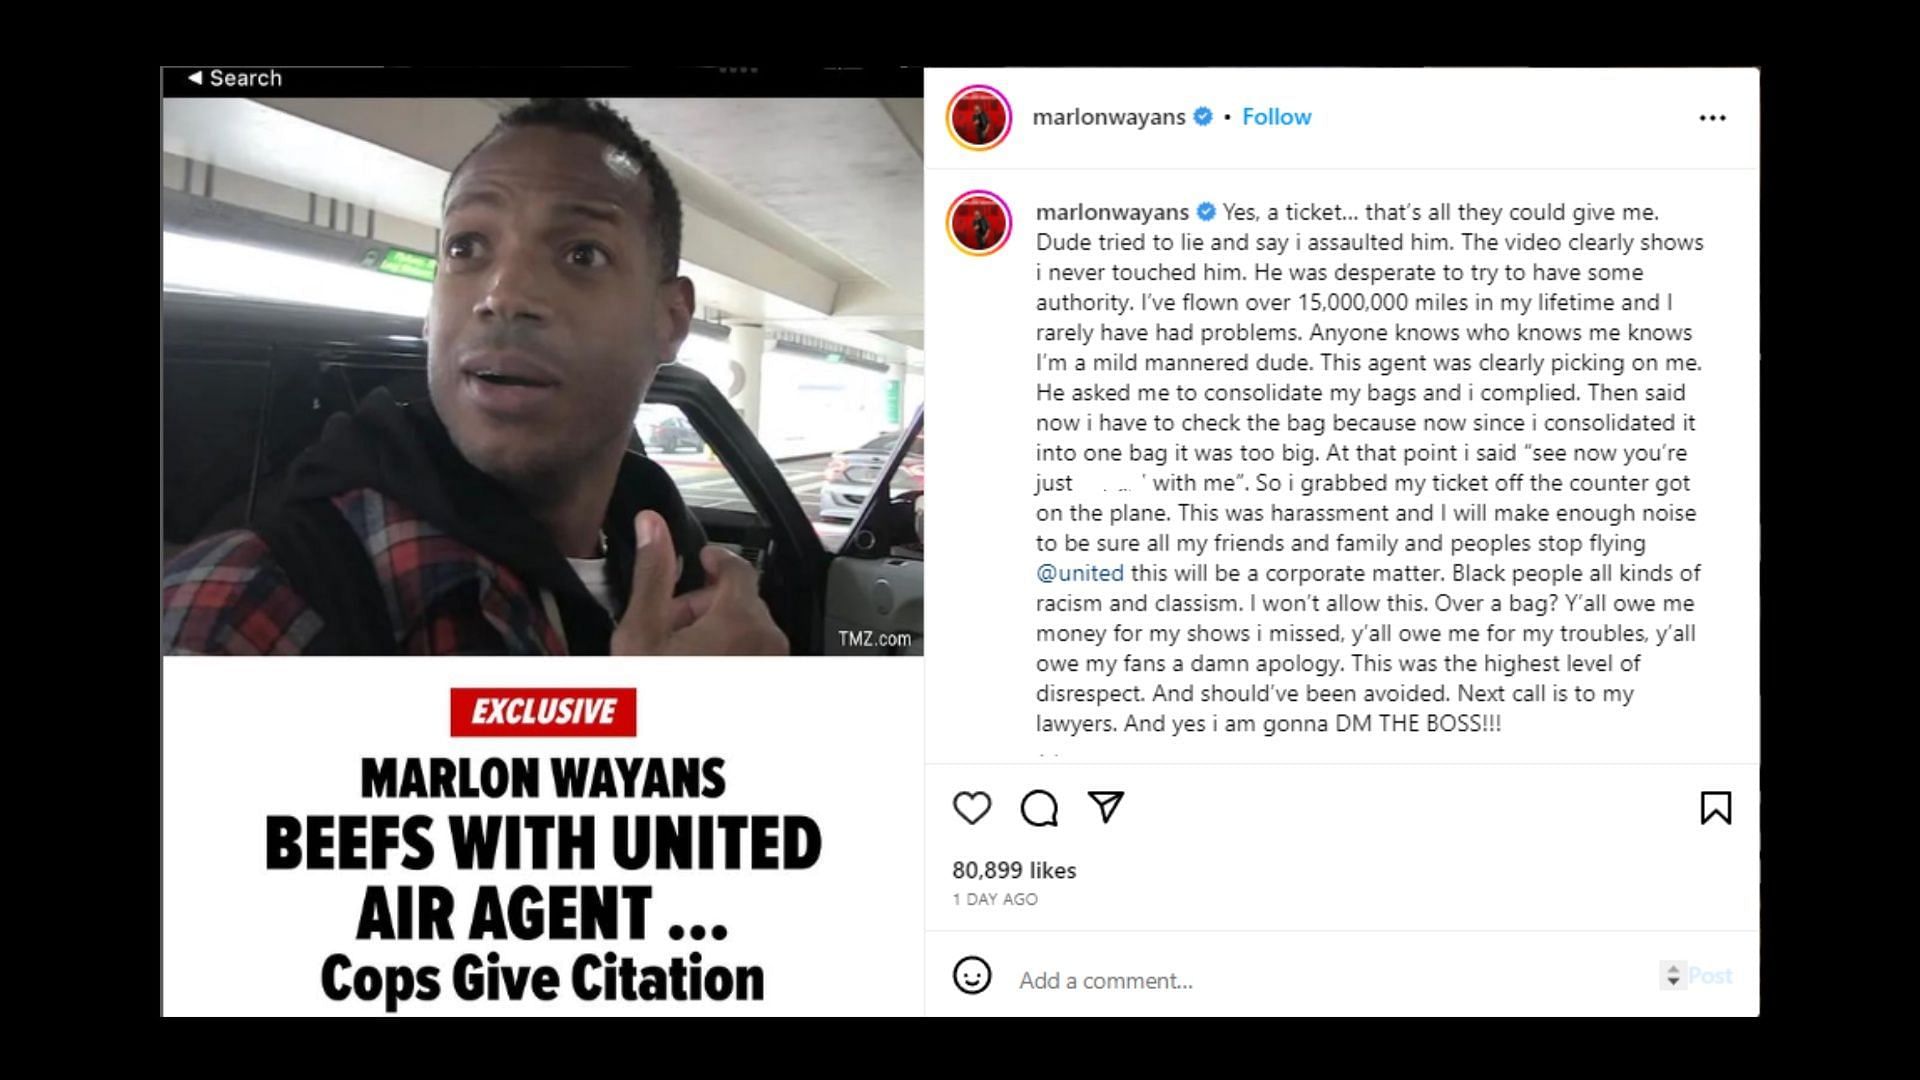 Marlon Wayans shared about his experience inside the flight (Image via marlonwayans/Instagram)